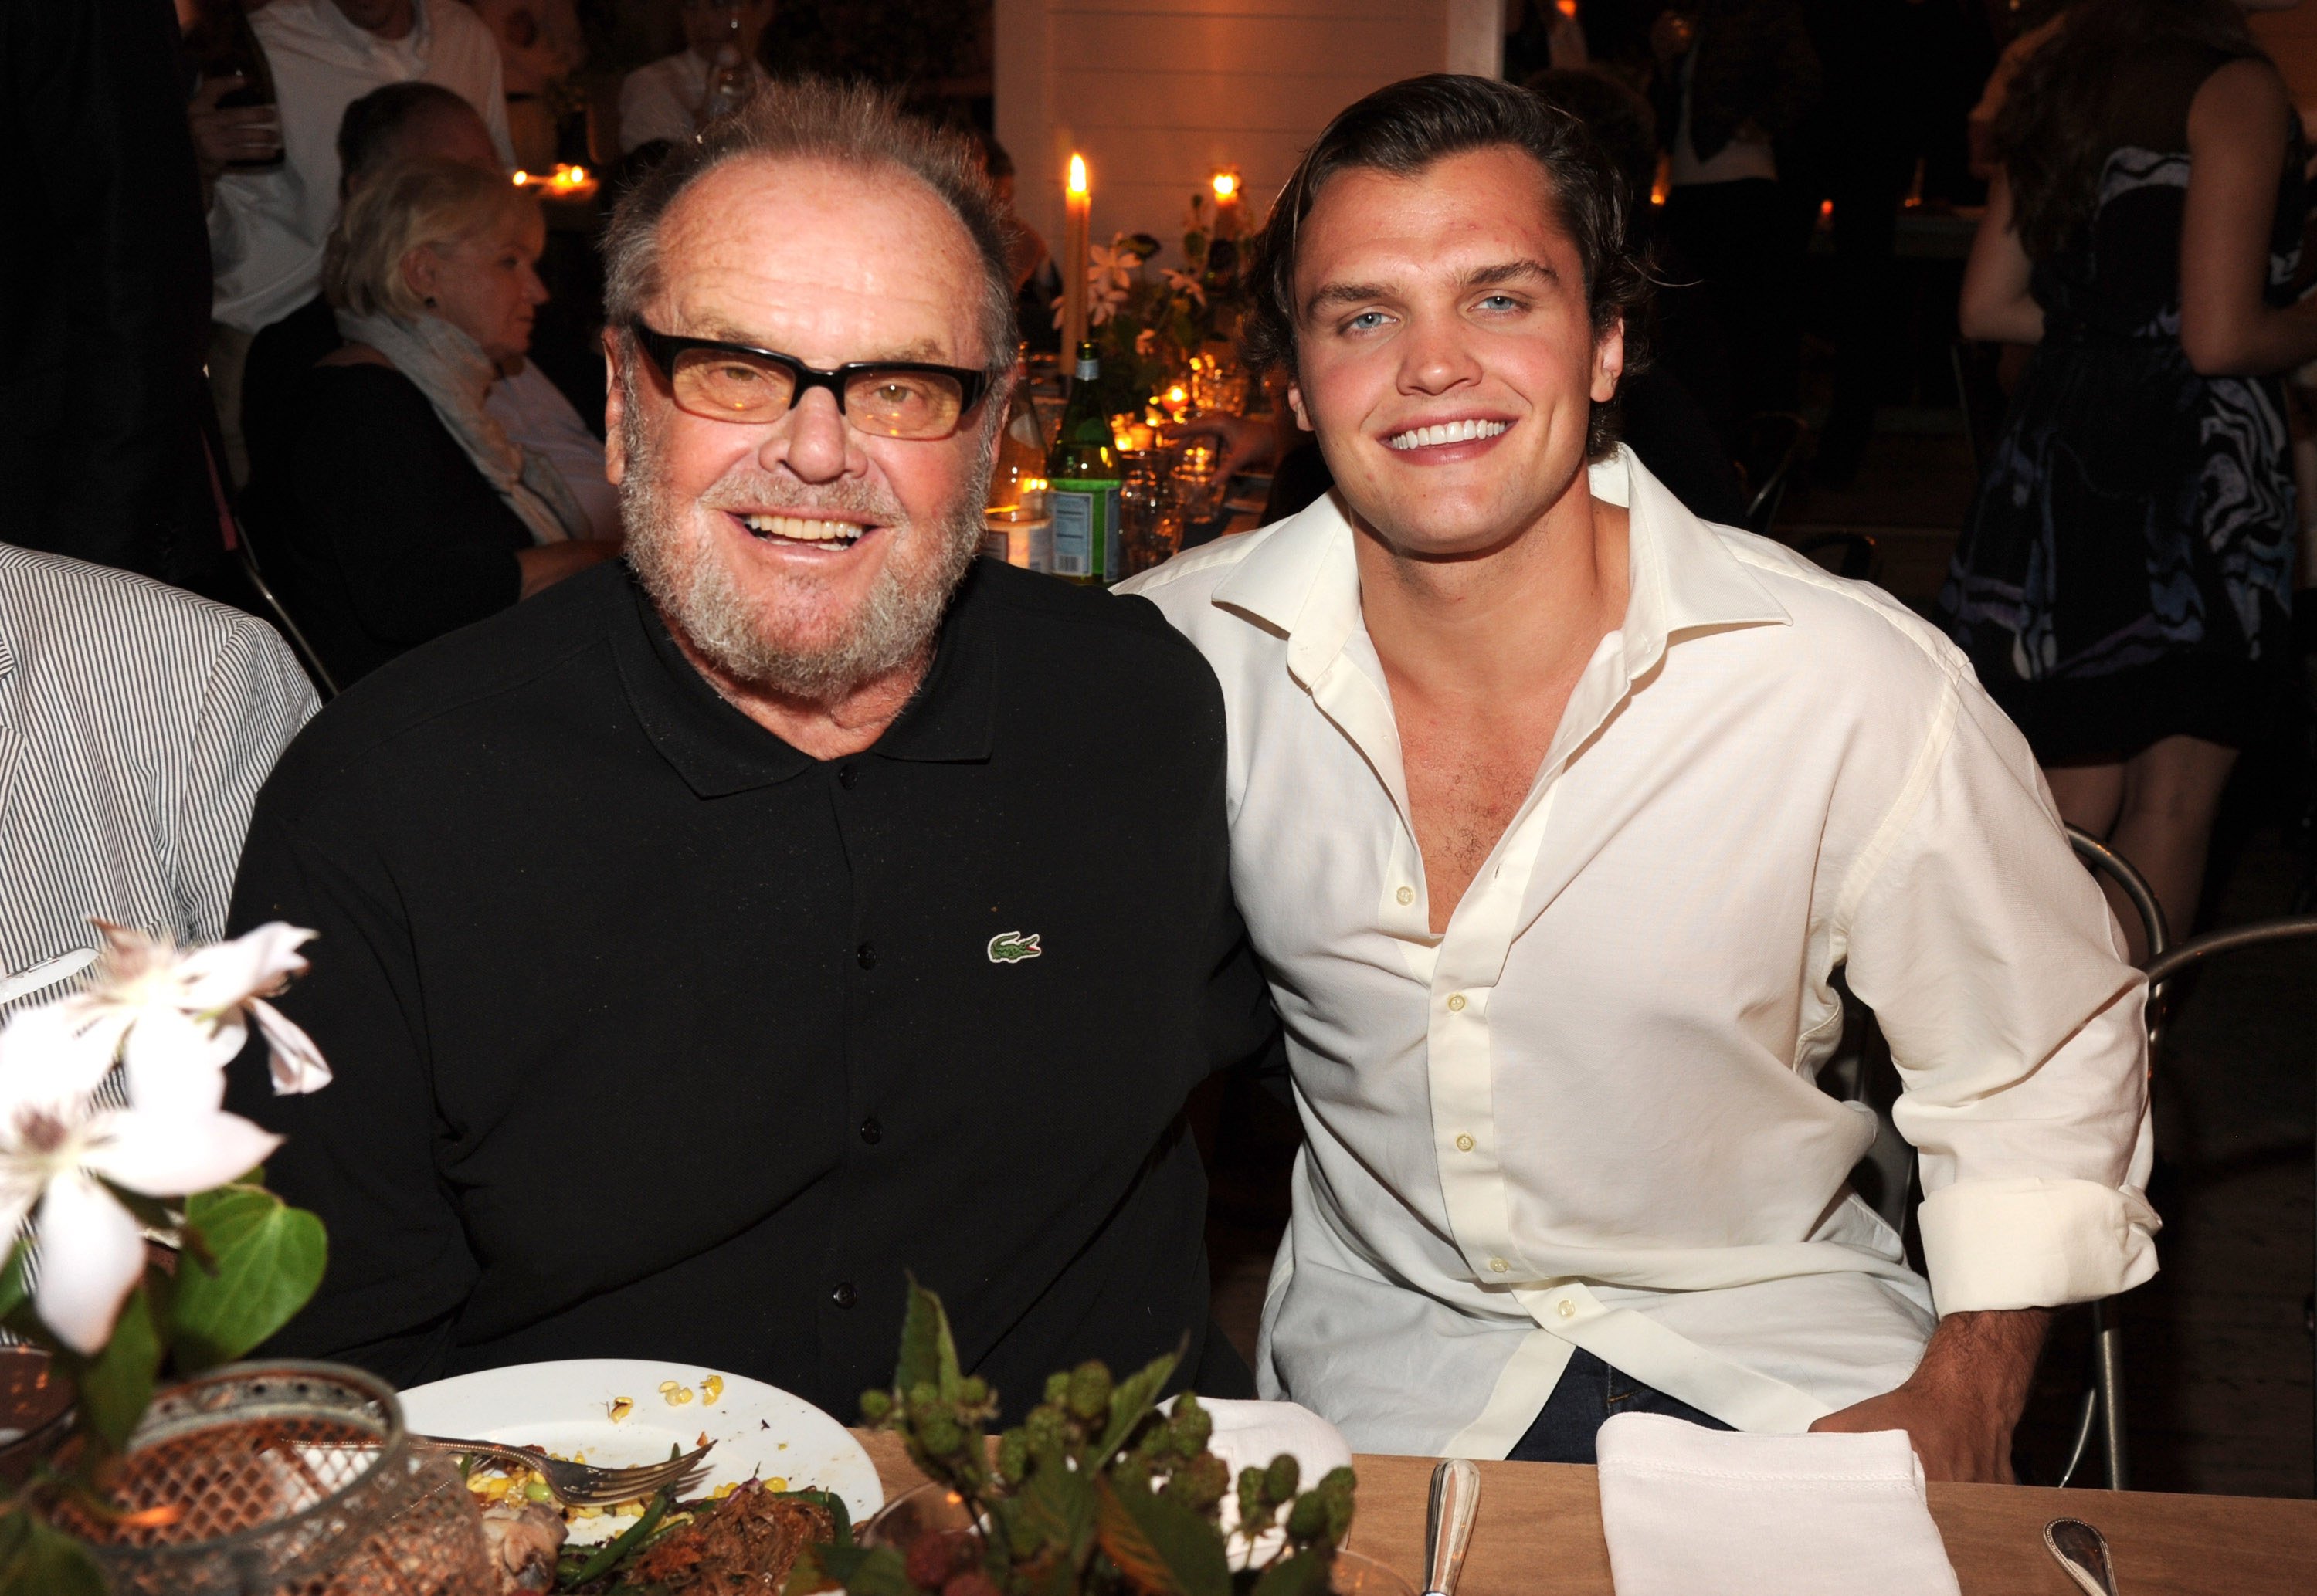 Ray Nicholson has his father Jack Nicholson’s unmistakable smile. Photo: WireImage